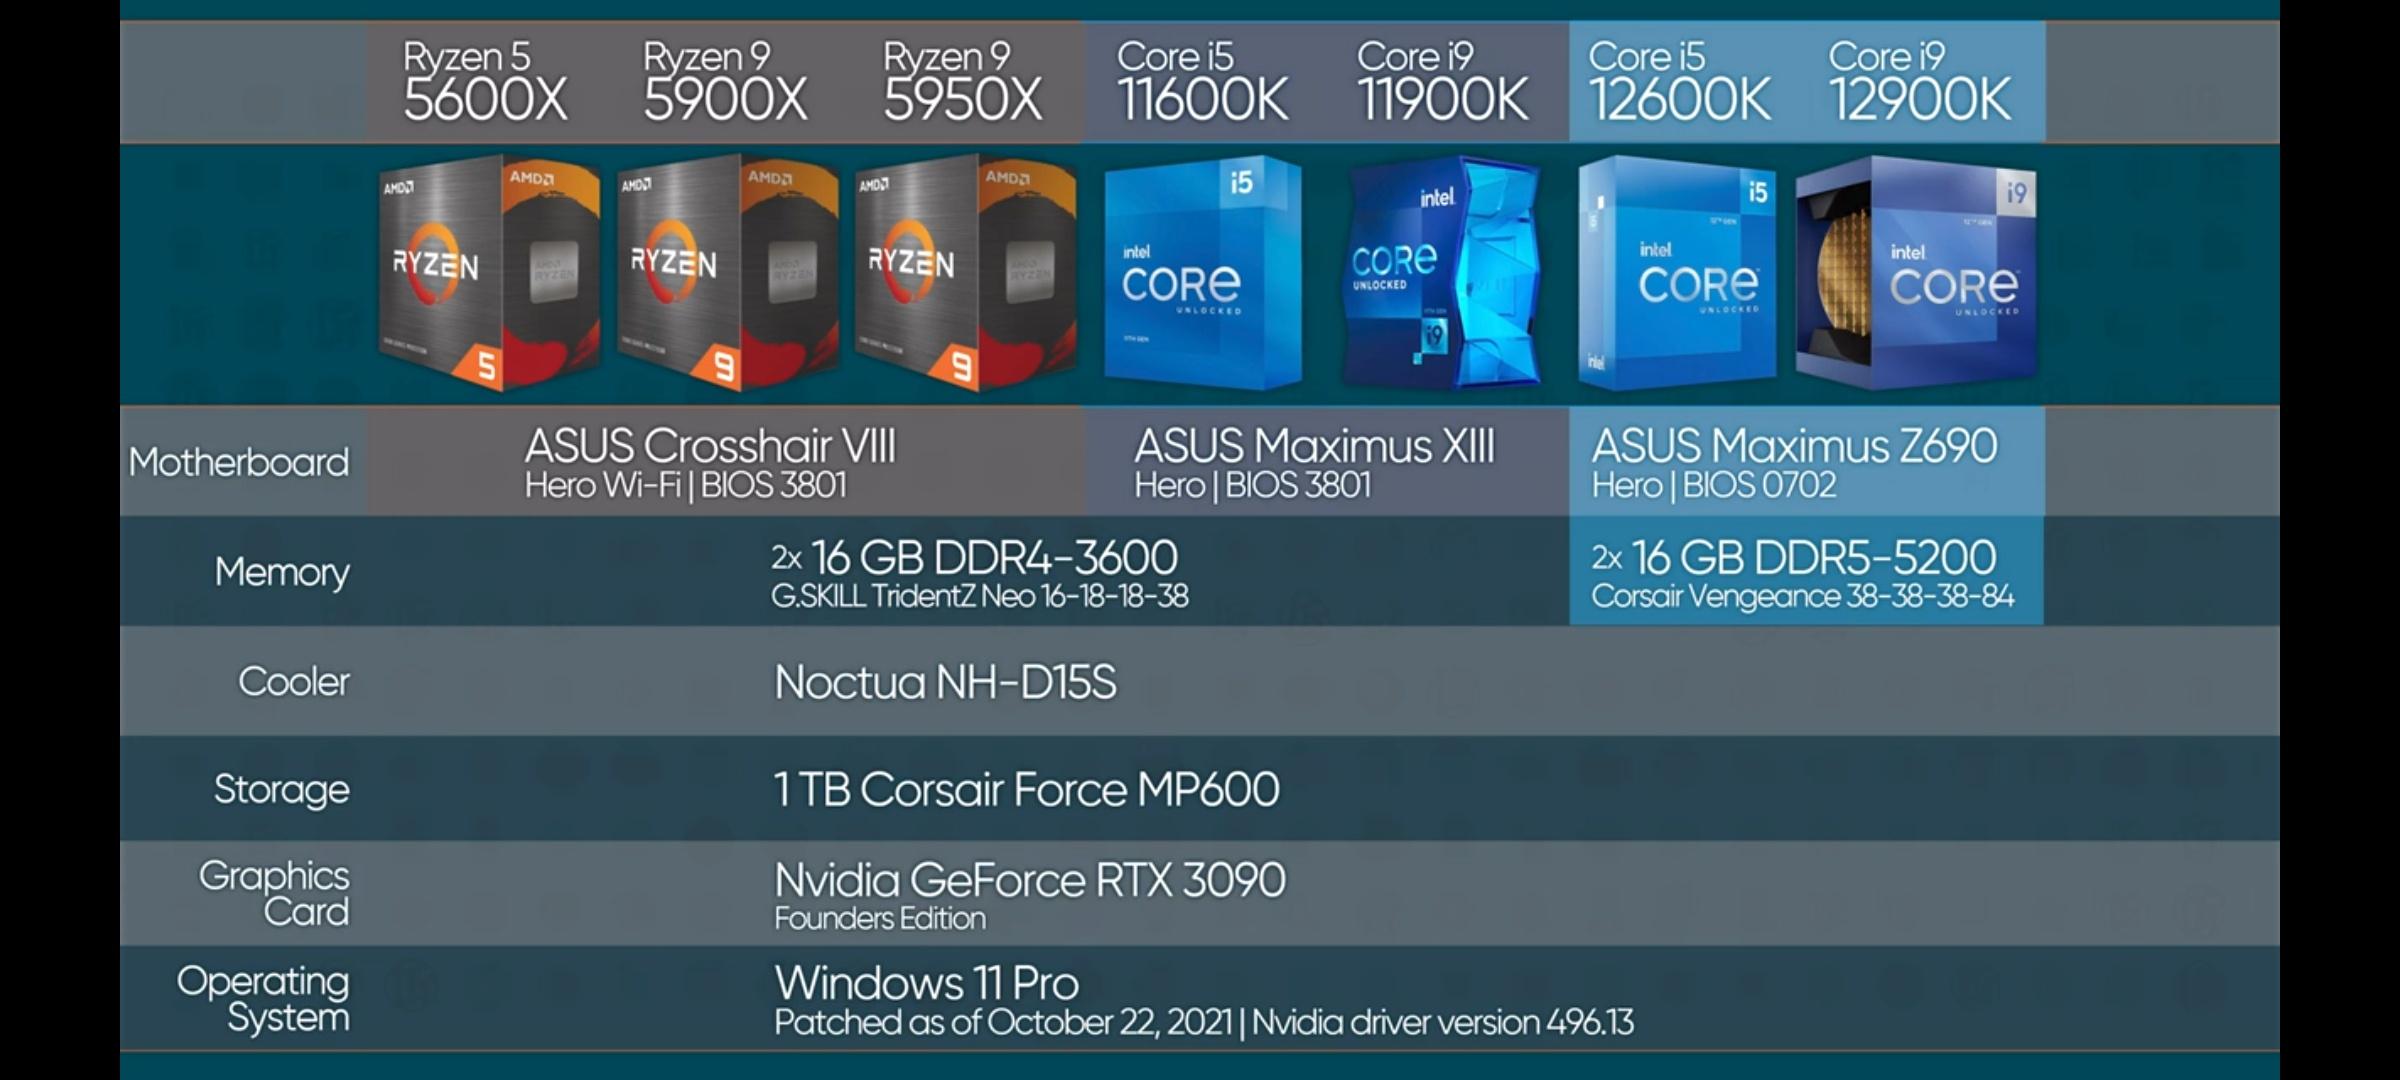 Core and i5-12600K review has been leaked - VideoCardz.com